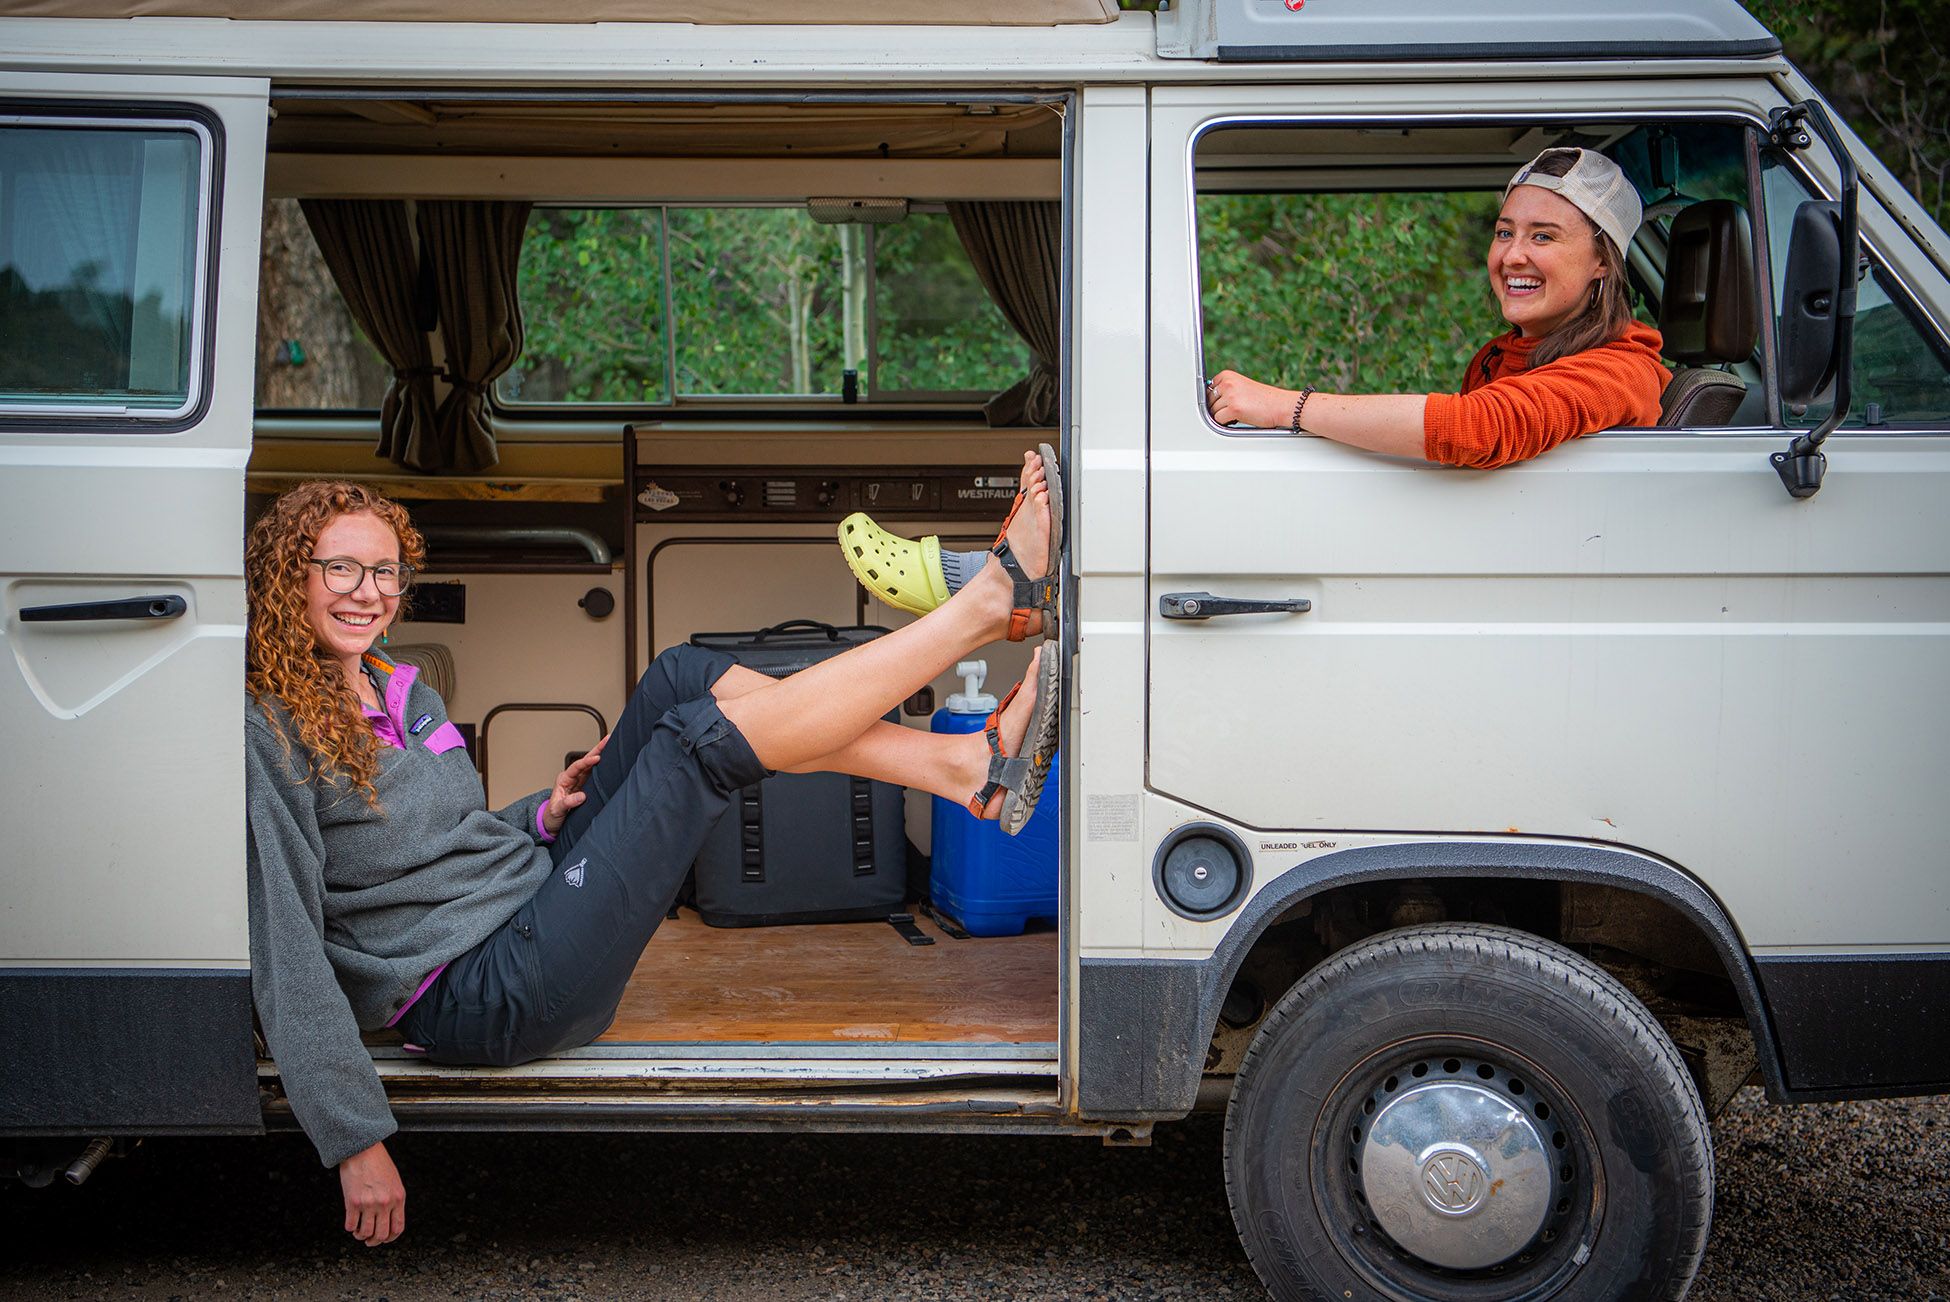 Visit Crested Butte and Gunnison and you just might meet other entrepreneurs, such as the two founders of Gnara, pictured here in a van.